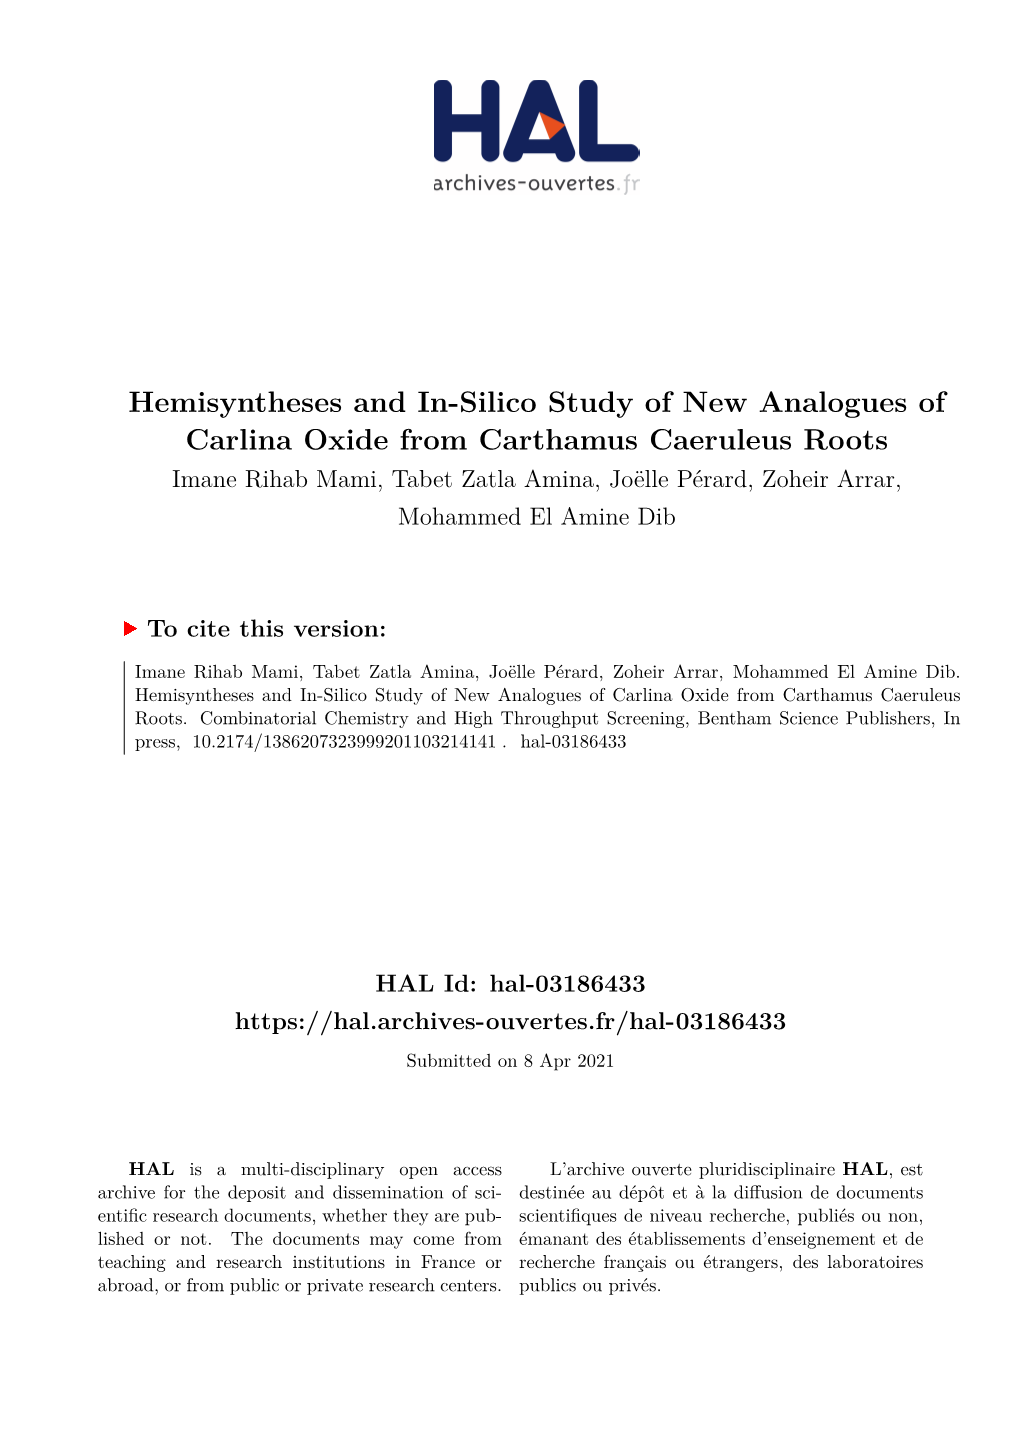 Hemisyntheses and In-Silico Study of New Analogues of Carlina Oxide